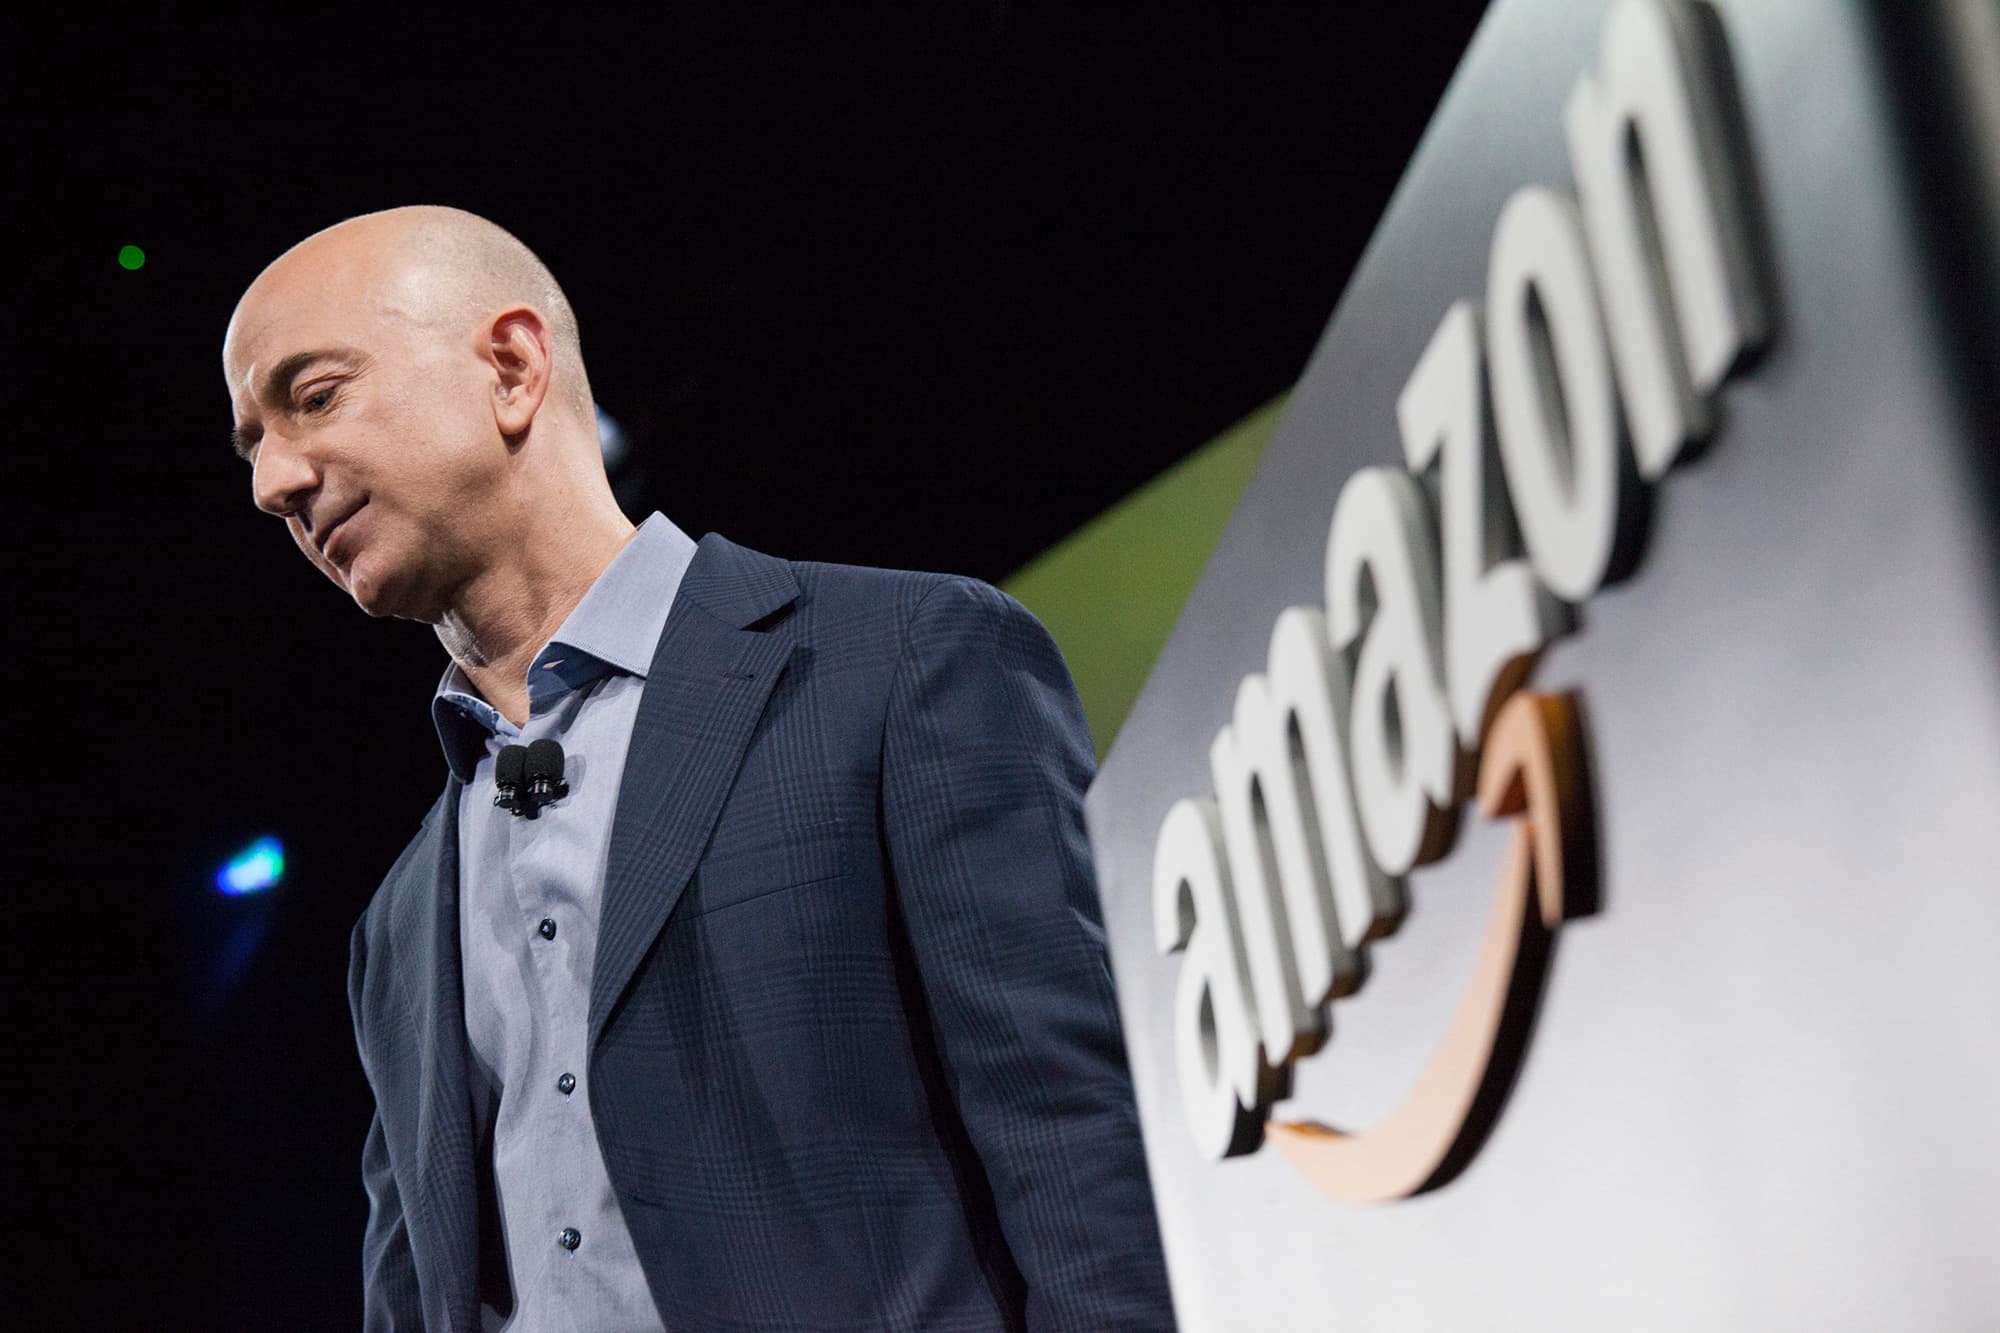 Amazon Rehire Policy In 2022 (All You Need To Know)